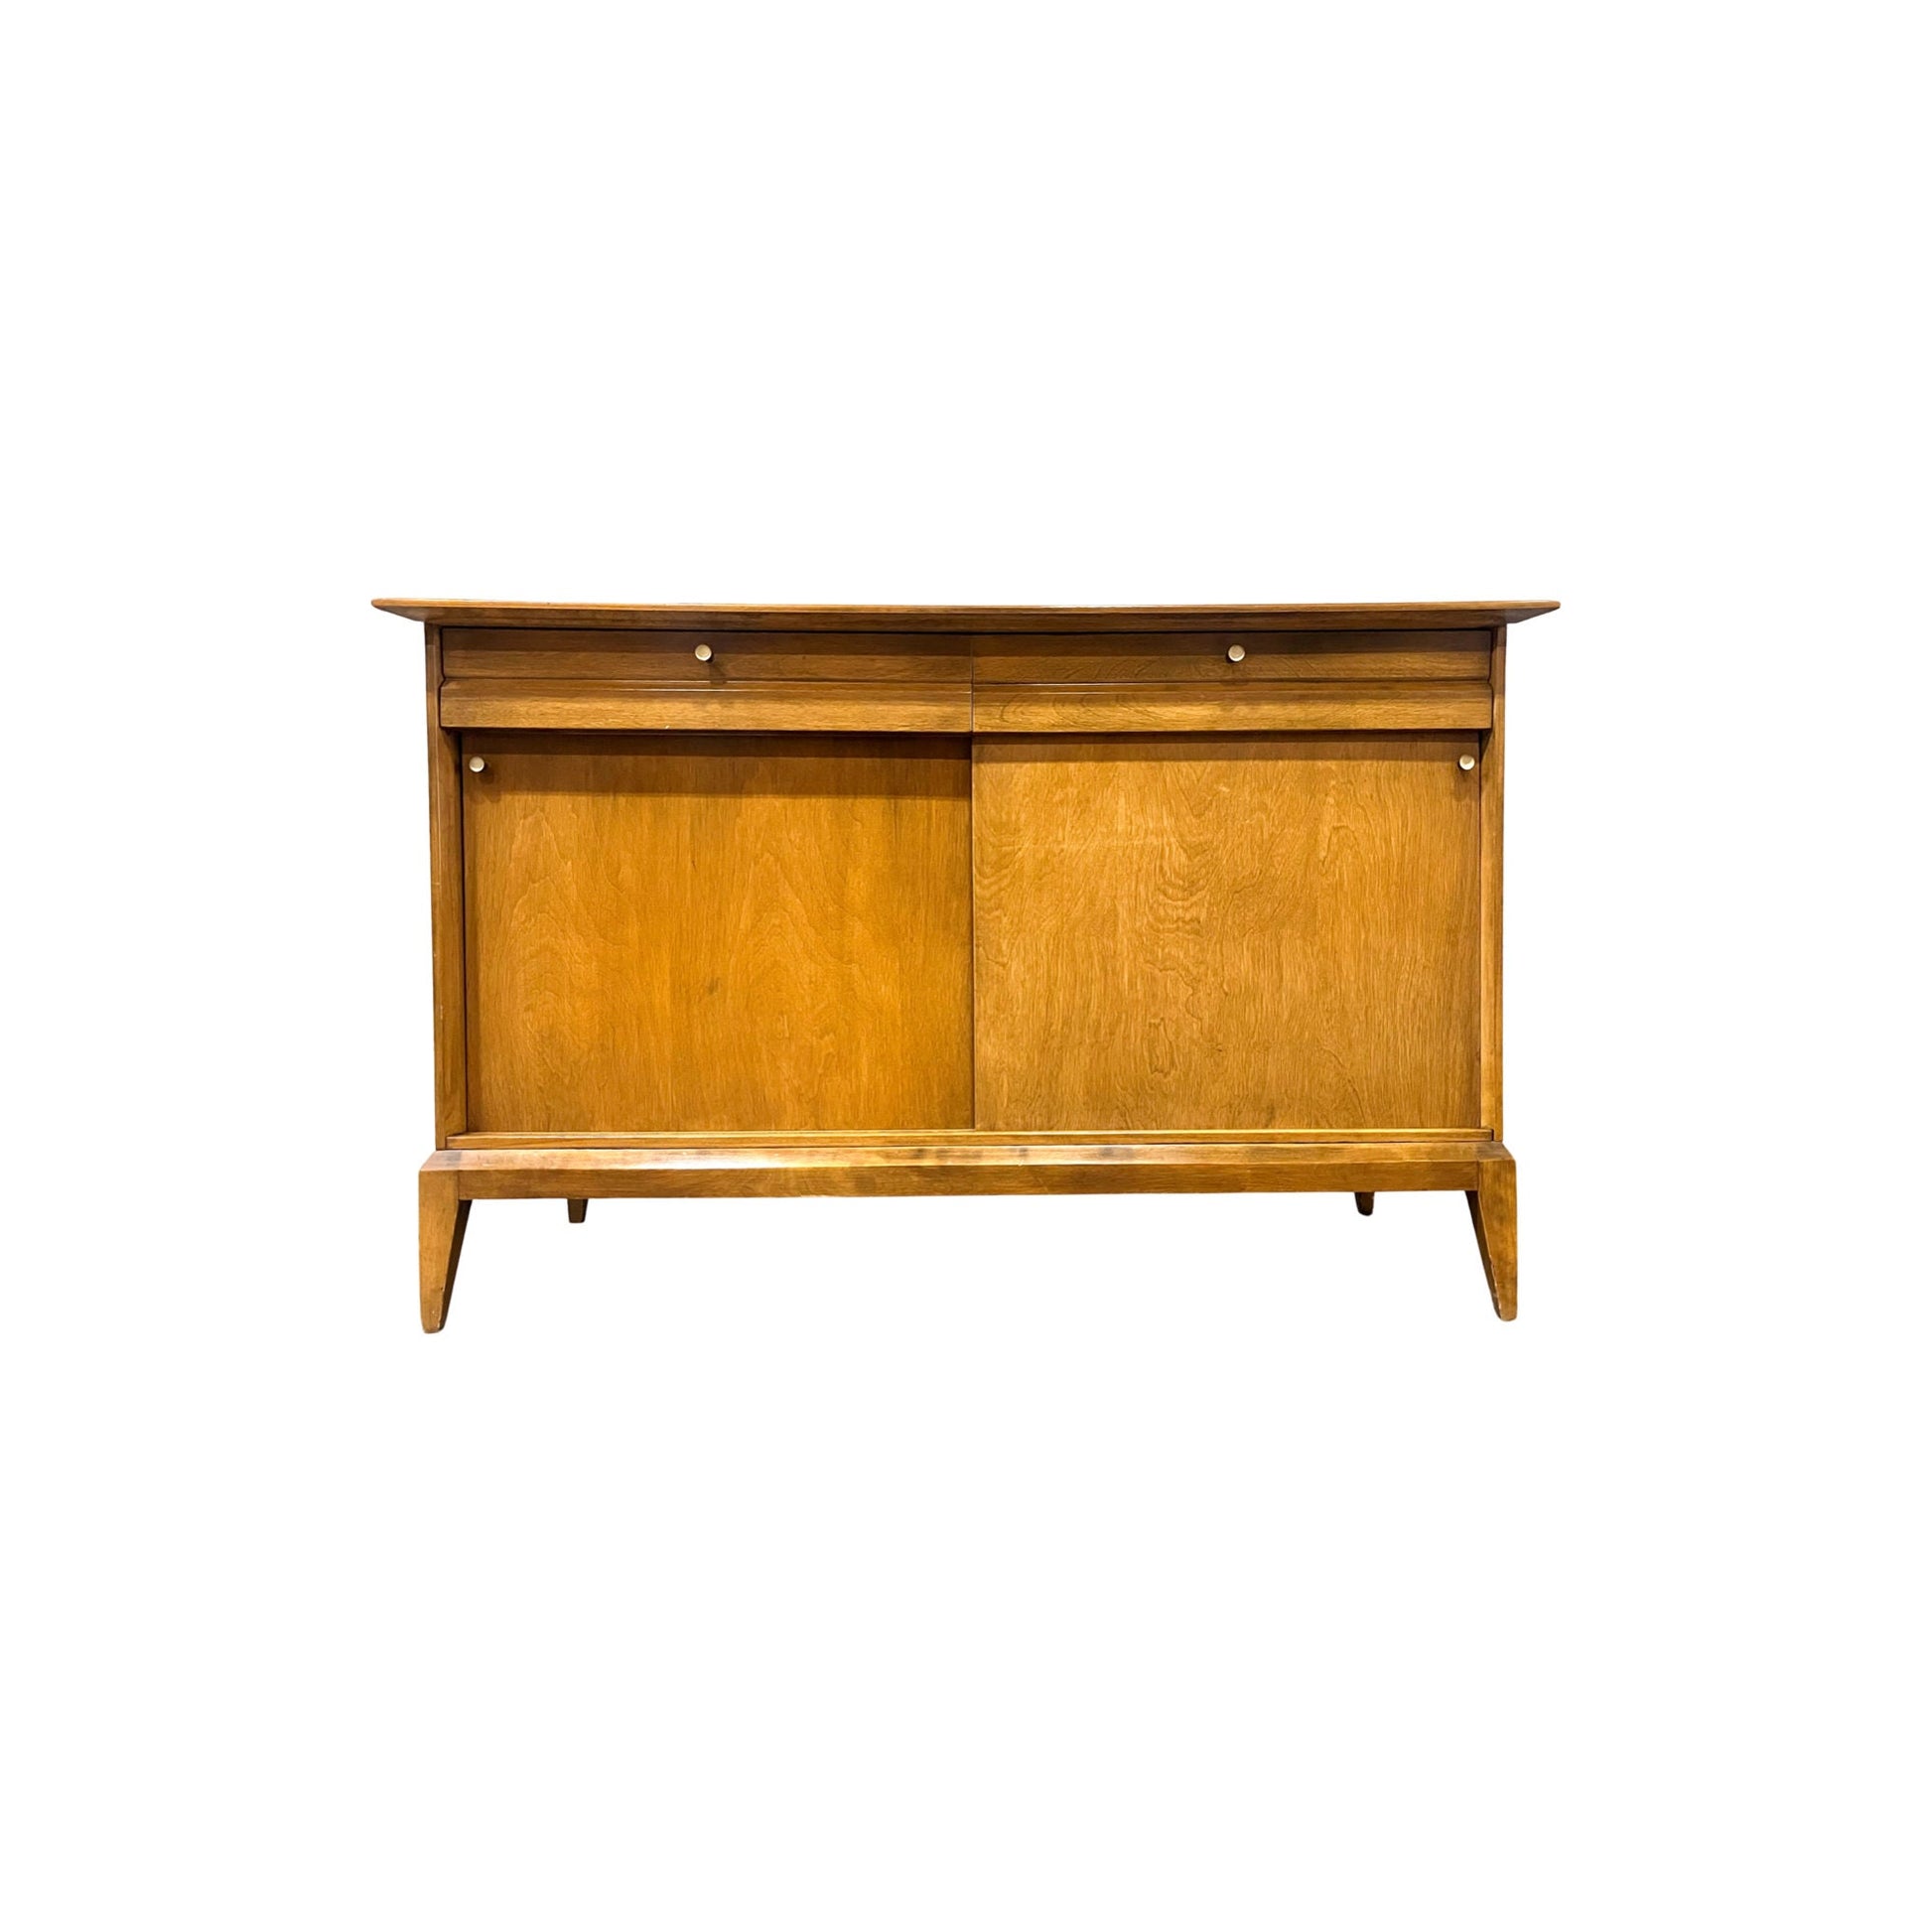 Heywood Wakefield Cadence Credenza - Front View